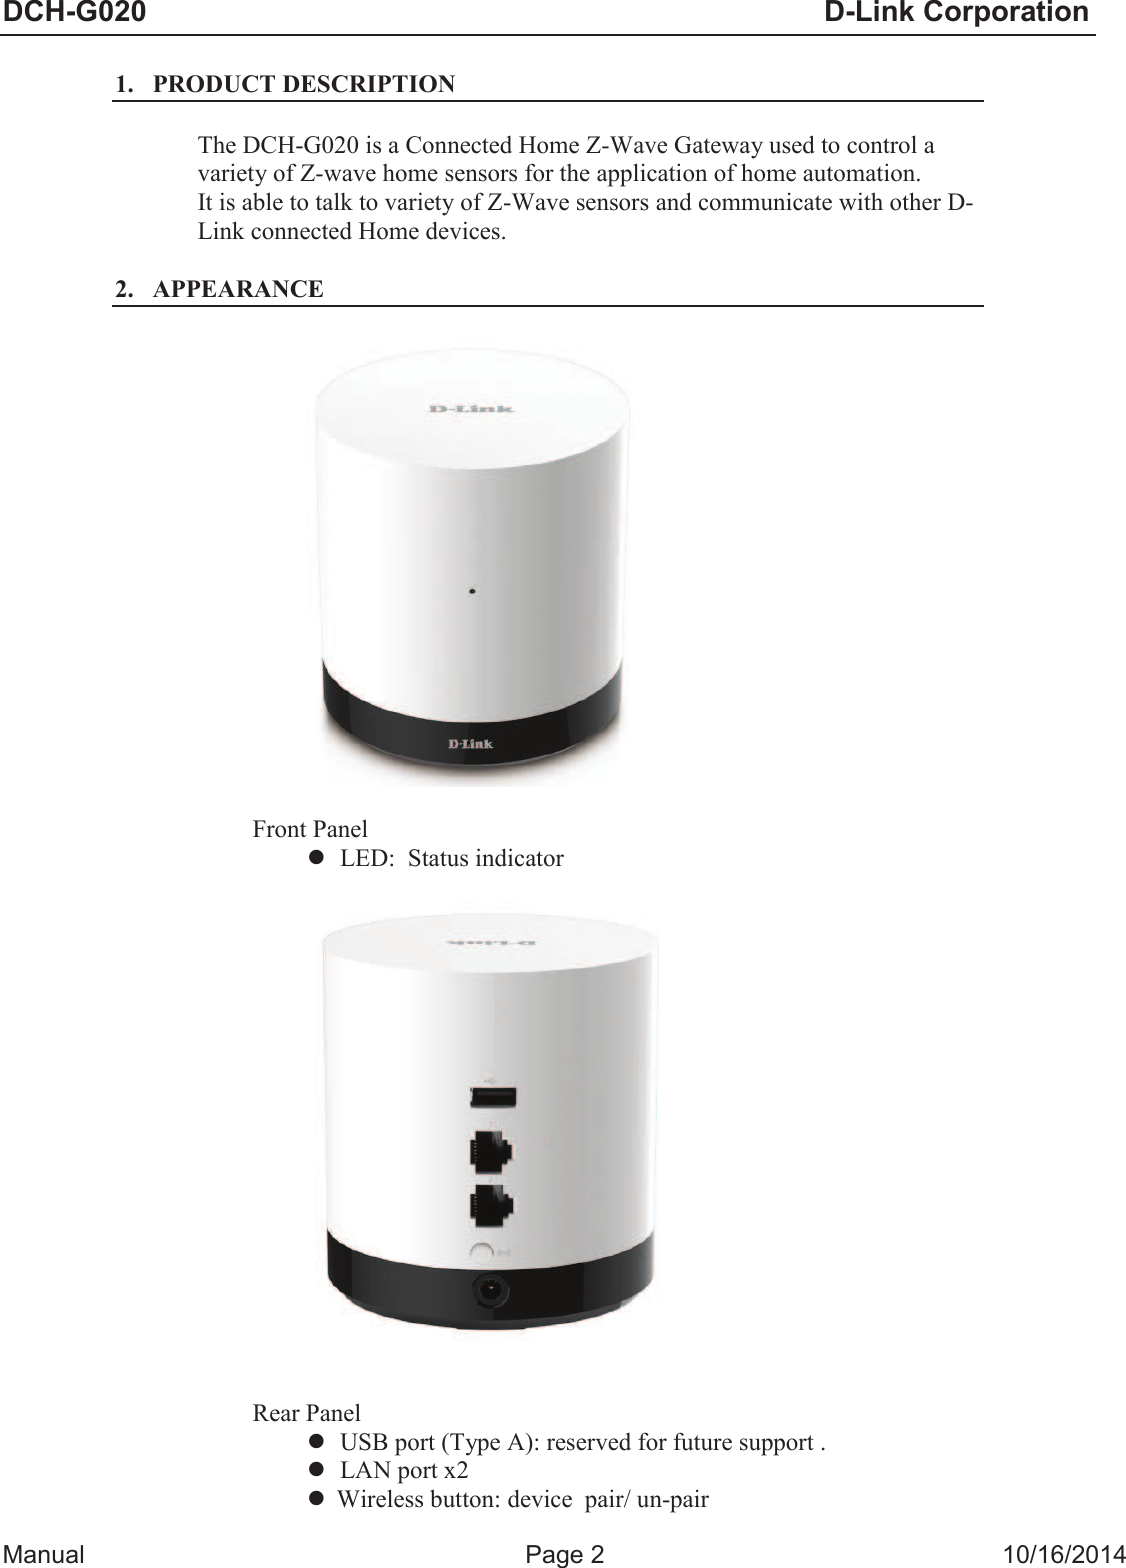 DCH-G020                            D-Link Corporation  Manual  Page 2  10/16/2014  1. PRODUCT DESCRIPTION  The DCH-G020 is a Connected Home Z-Wave Gateway used to control a variety of Z-wave home sensors for the application of home automation. It is able to talk to variety of Z-Wave sensors and communicate with other D-Link connected Home devices.  2. APPEARANCE    Front Panel l LED:  Status indicator      Rear Panel l USB port (Type A): reserved for future support . l LAN port x2 l Wireless button: device  pair/ un-pair 